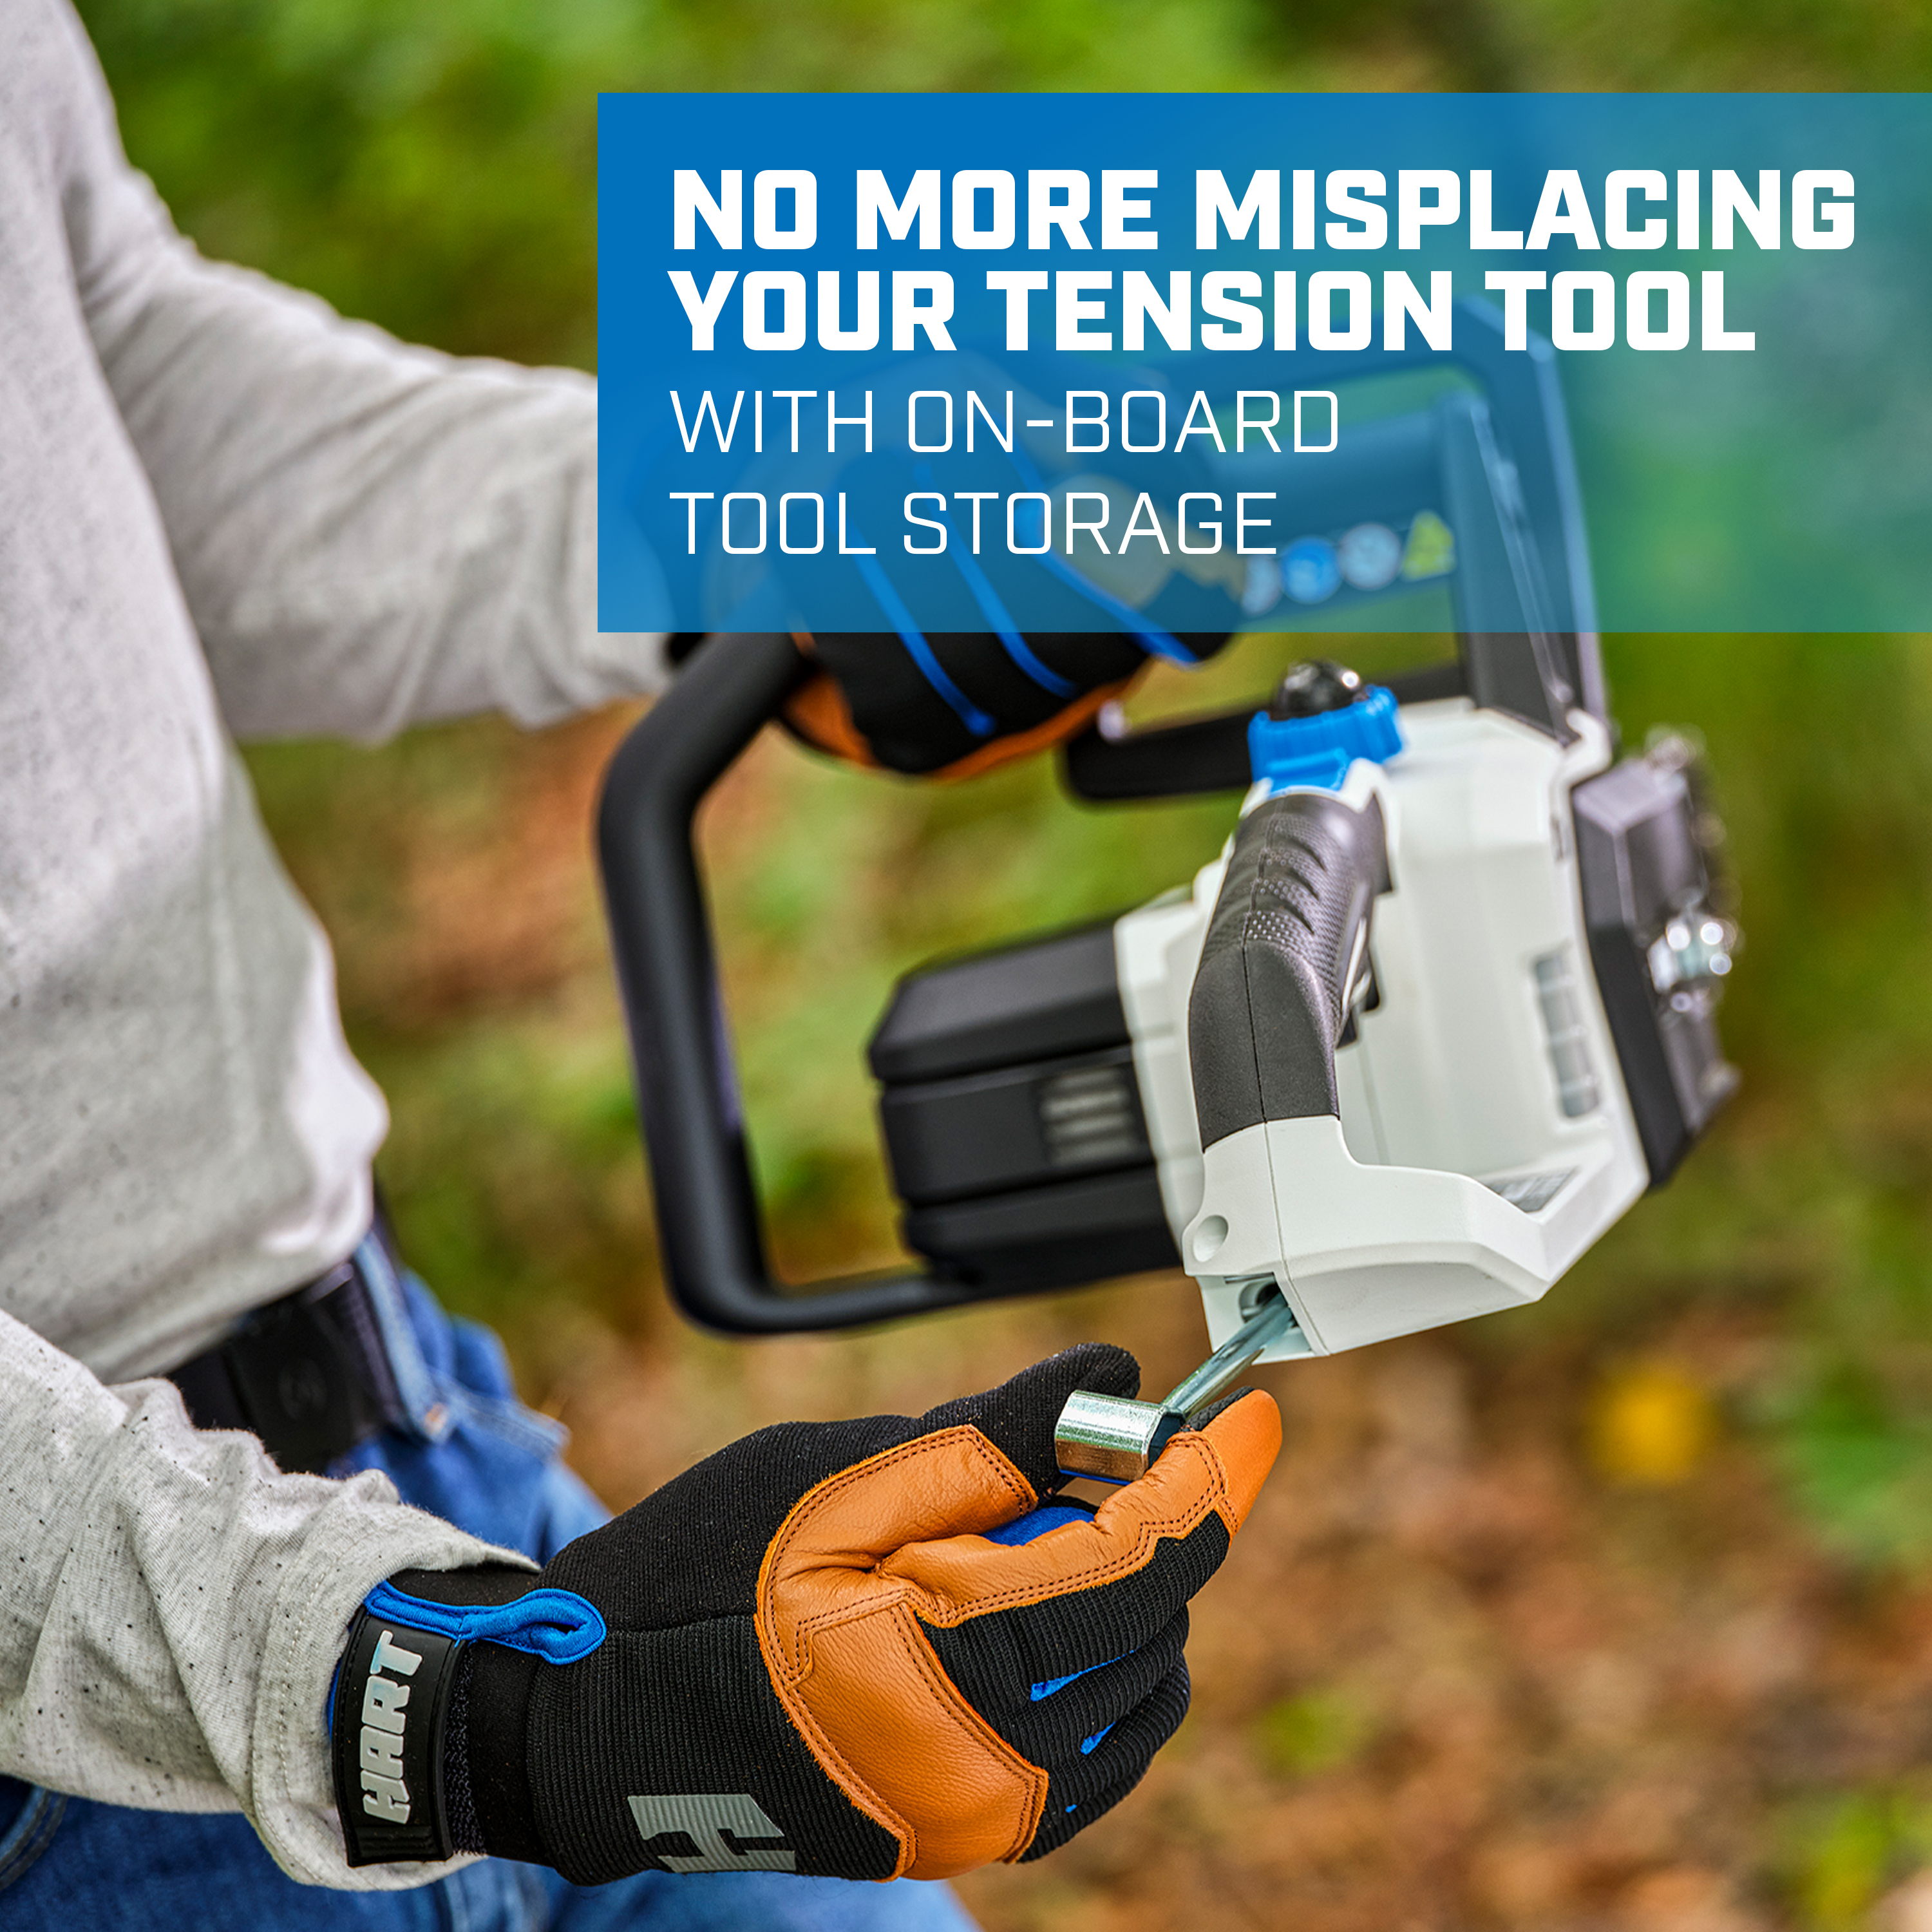 No More Misplacing Your Tension Tool with On-Board Tool Storage